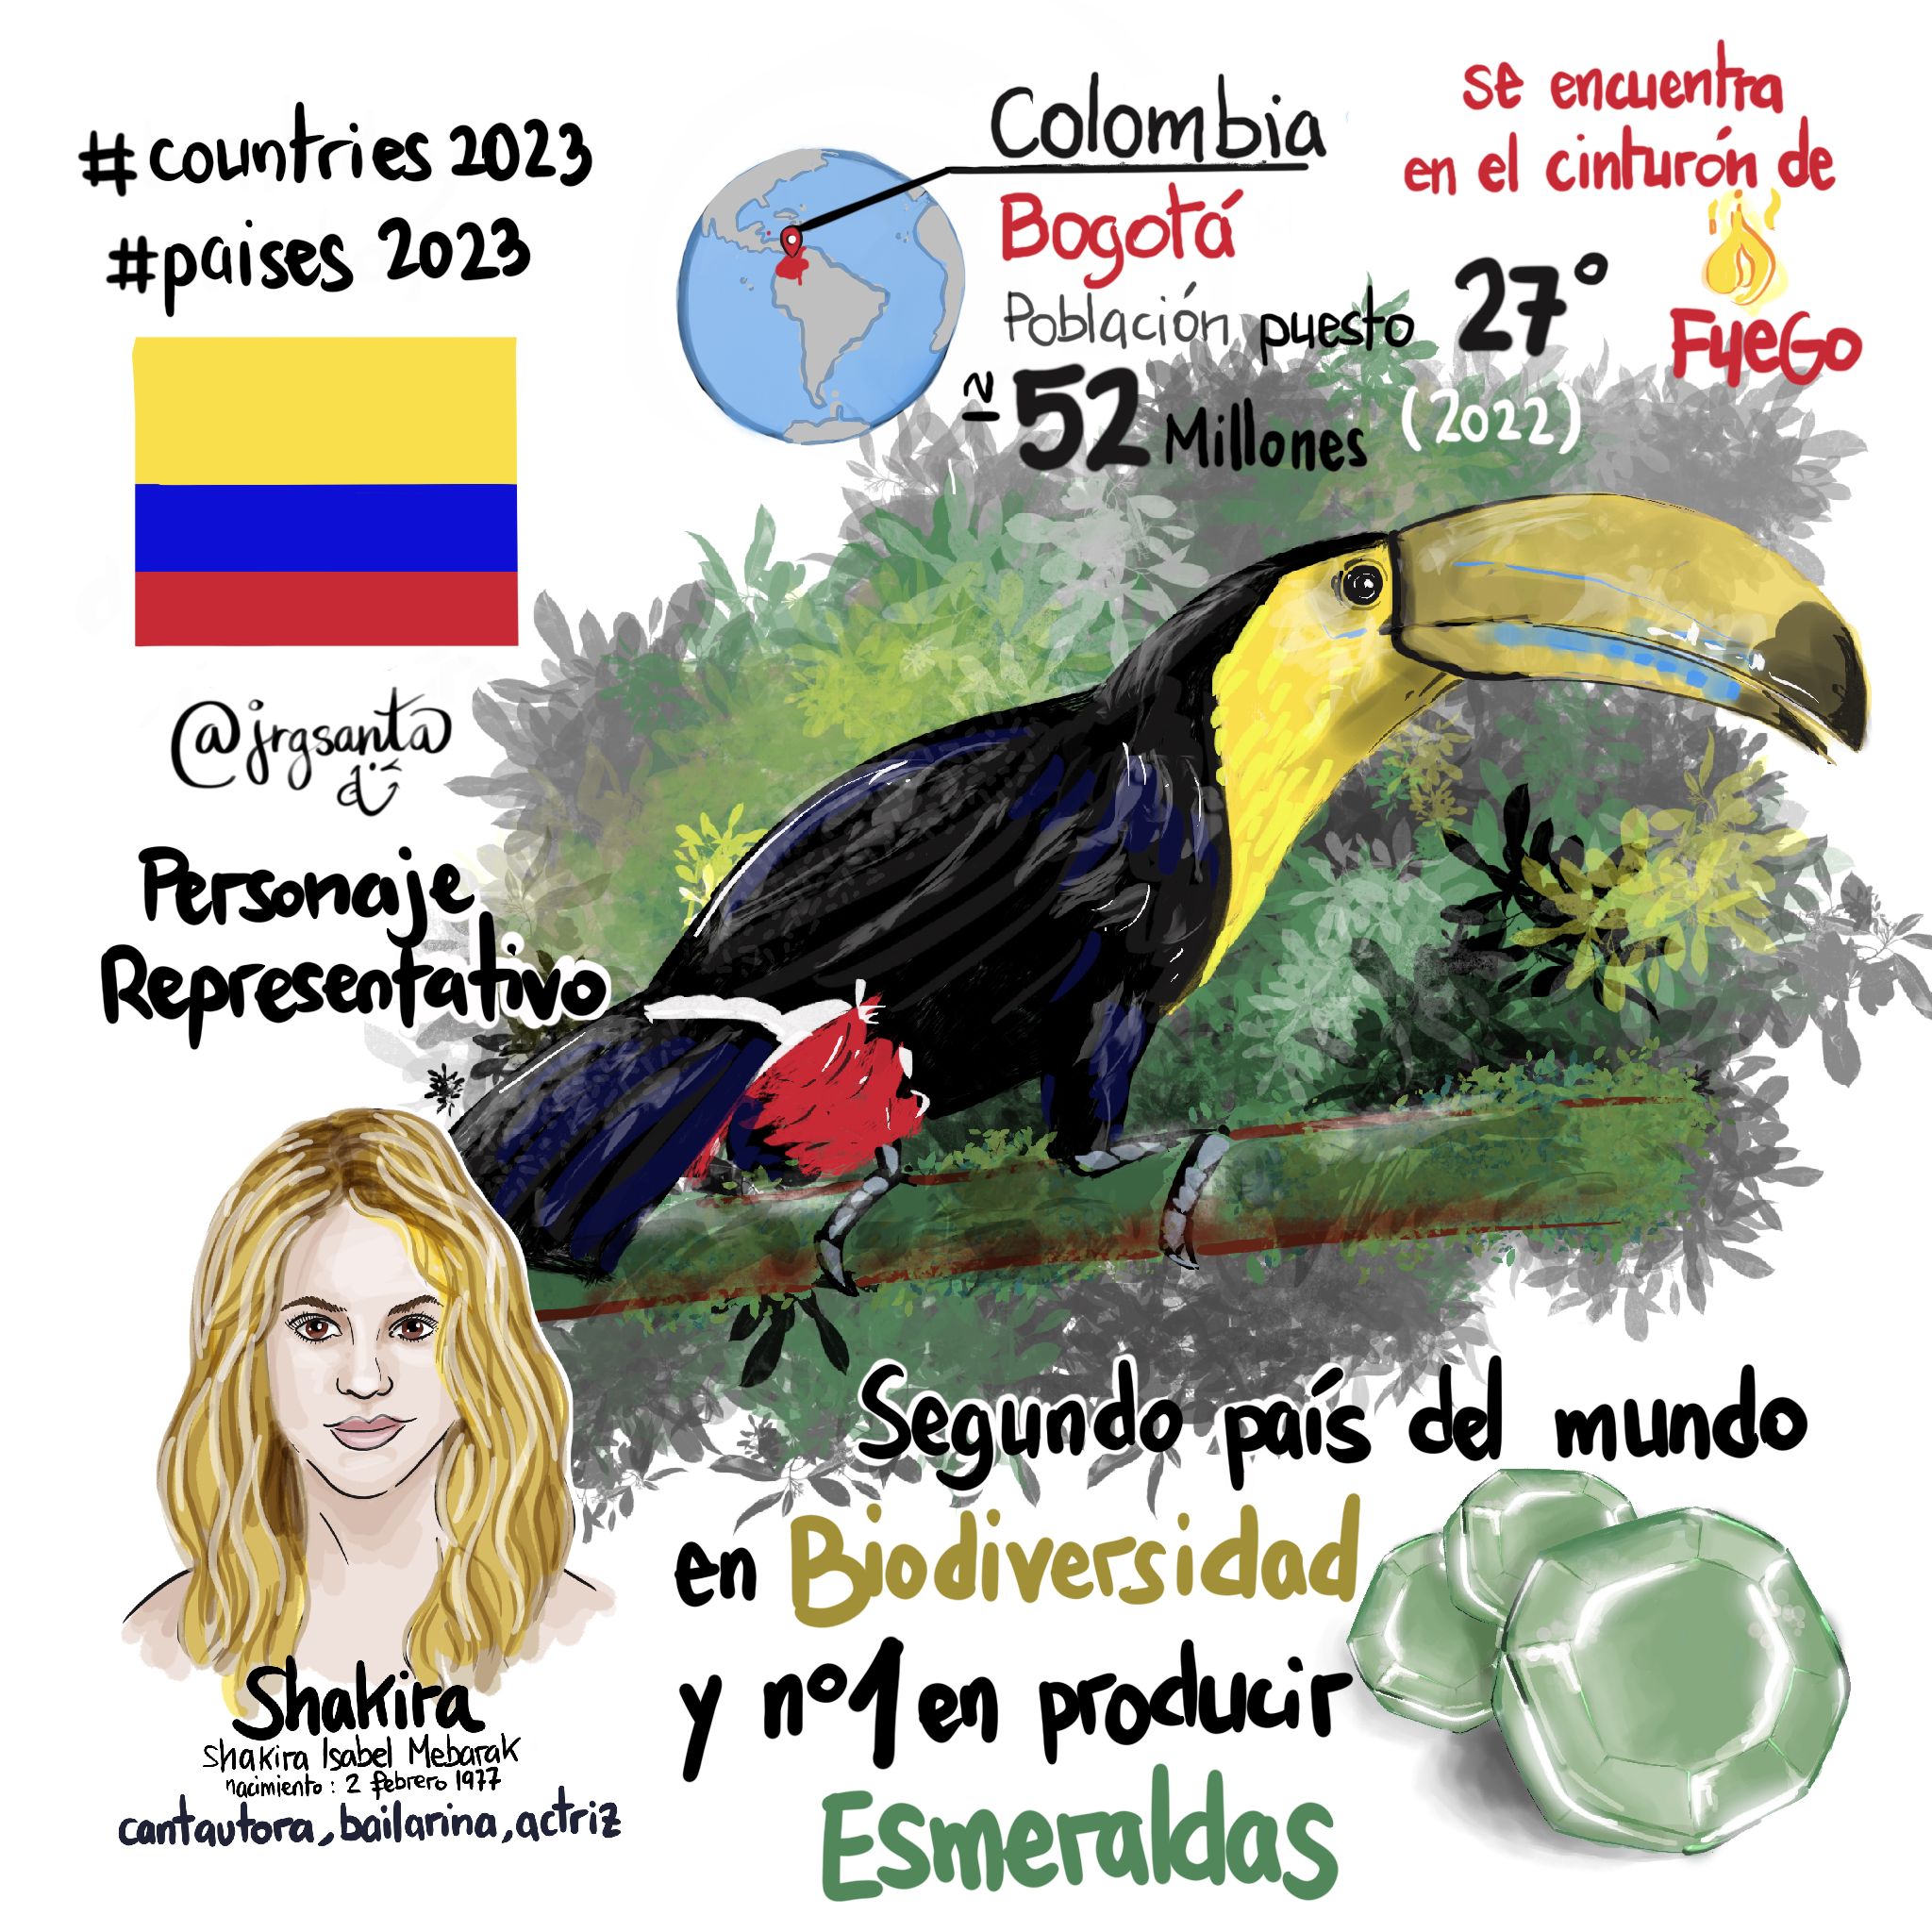 Colombia #paises2023